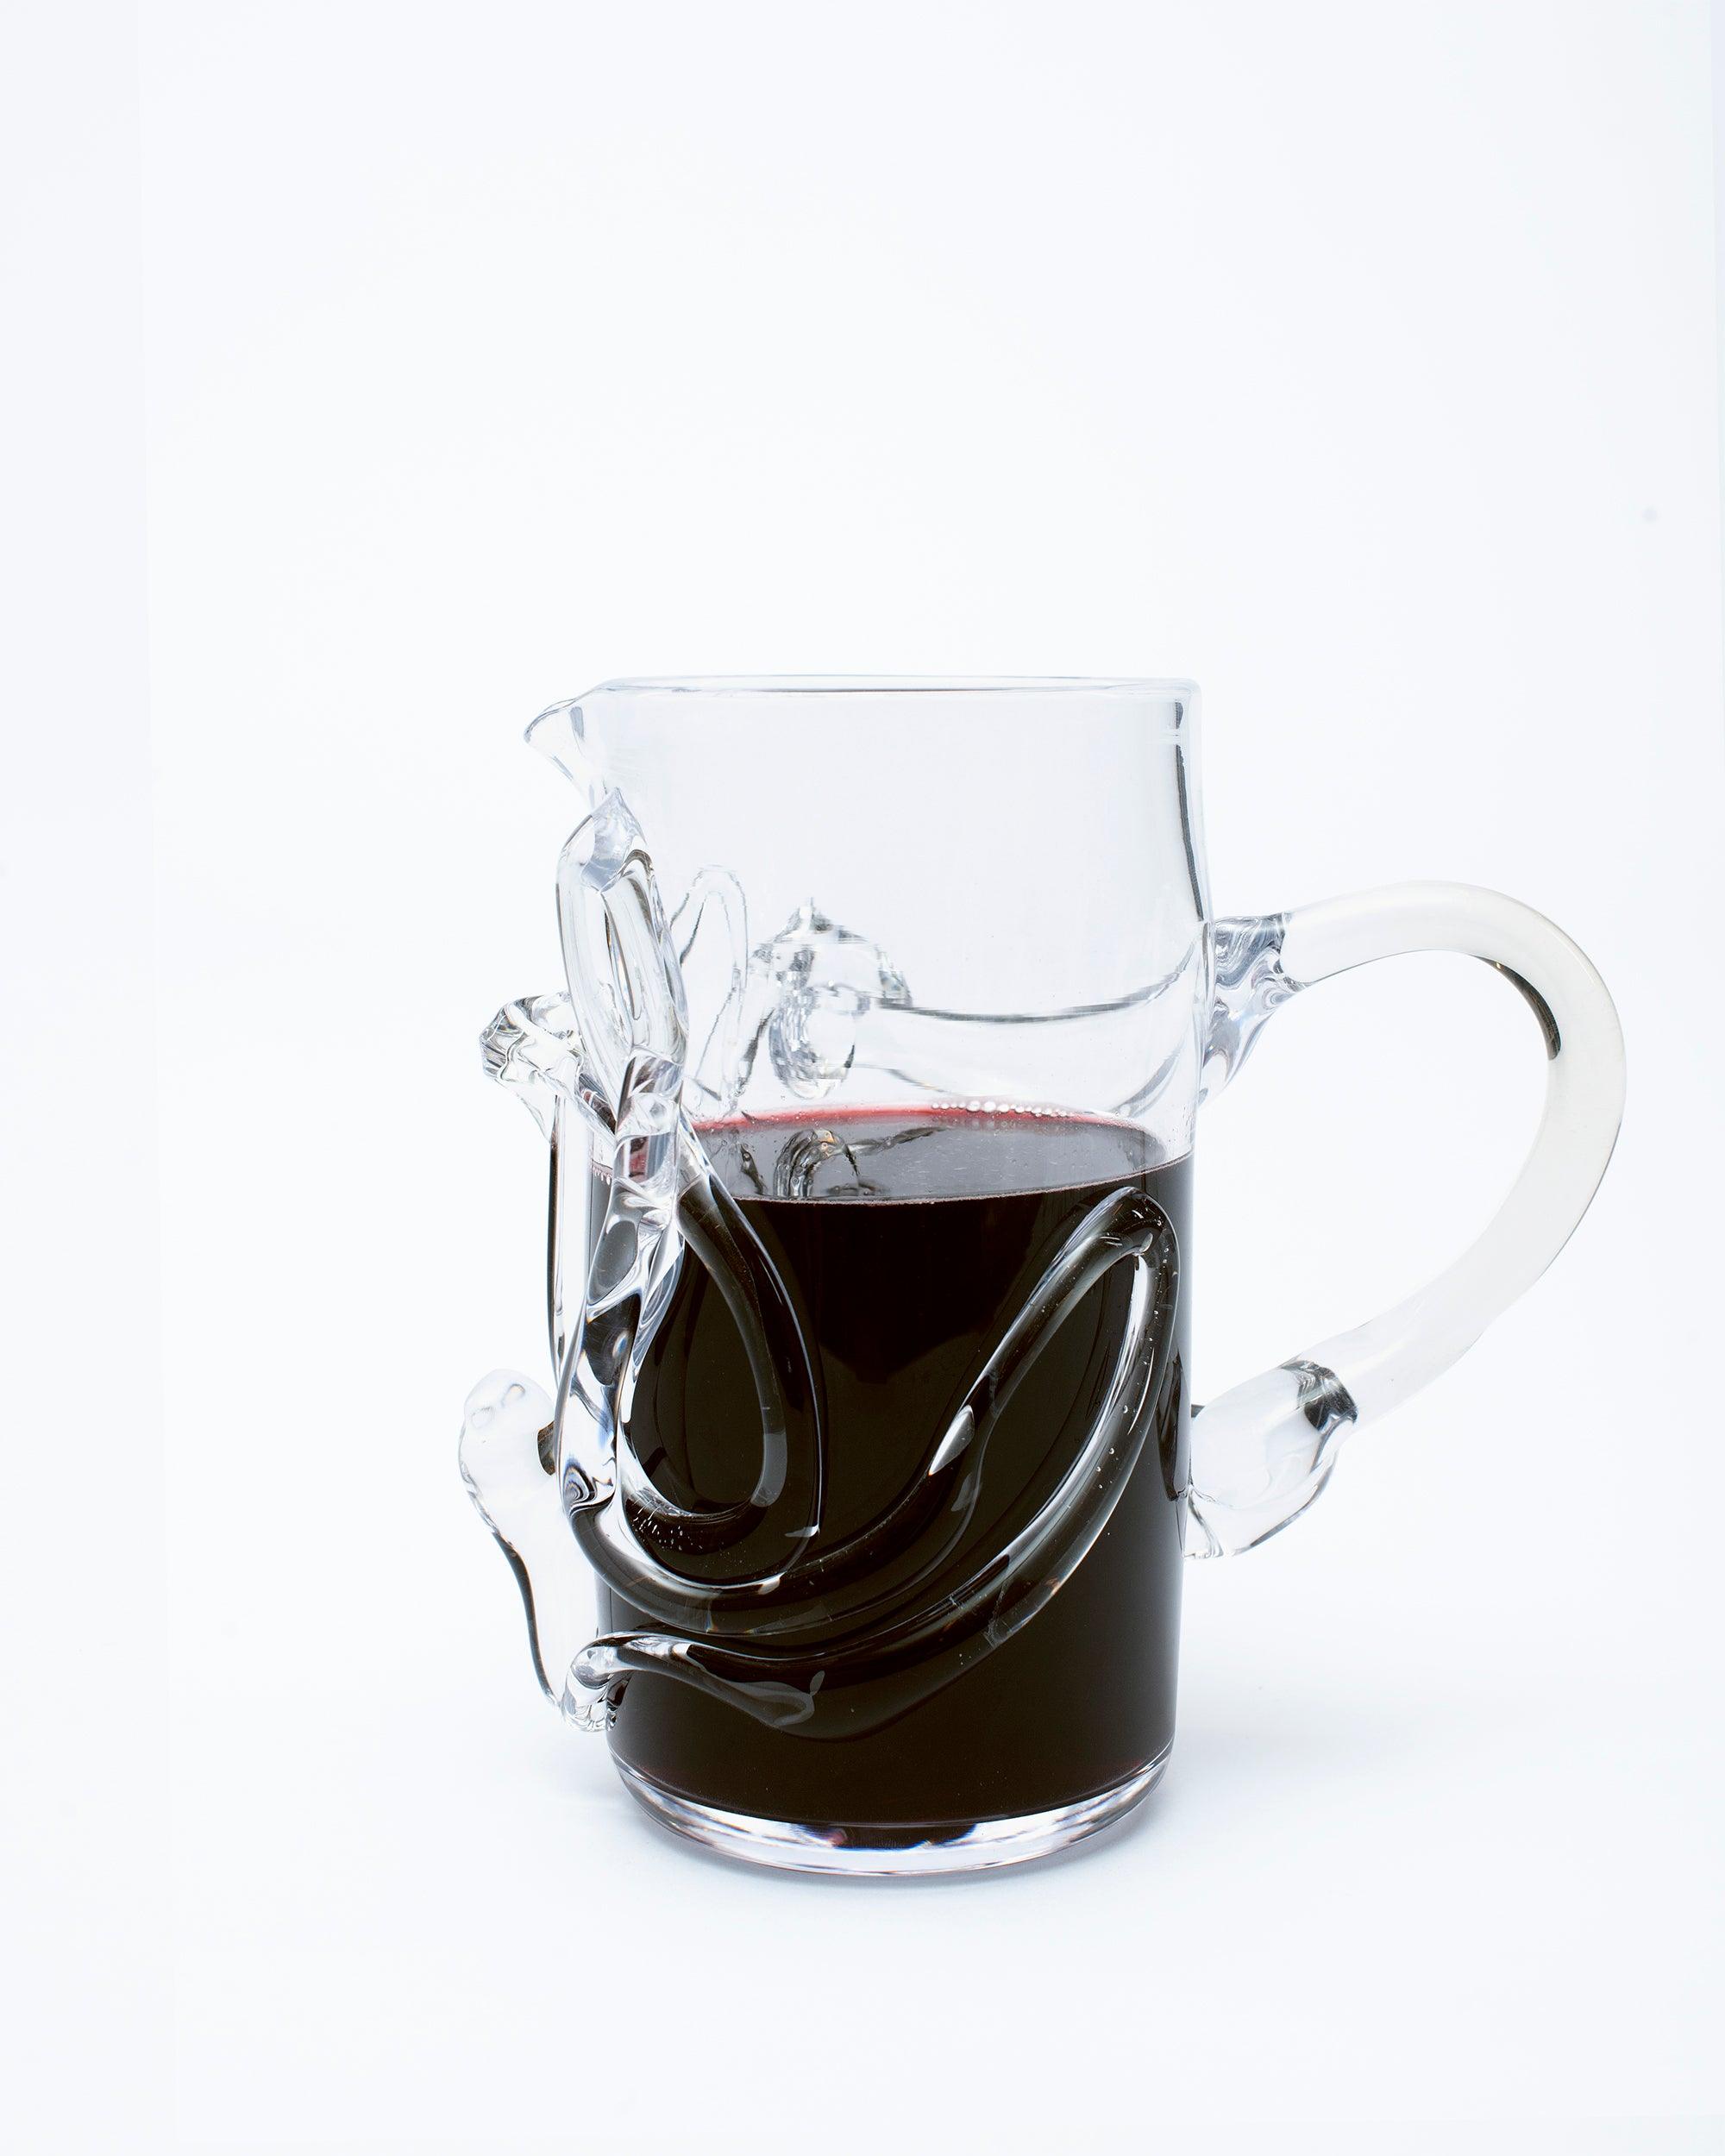 Glass pitcher with melted glass details with handle on the right side with wine on white background